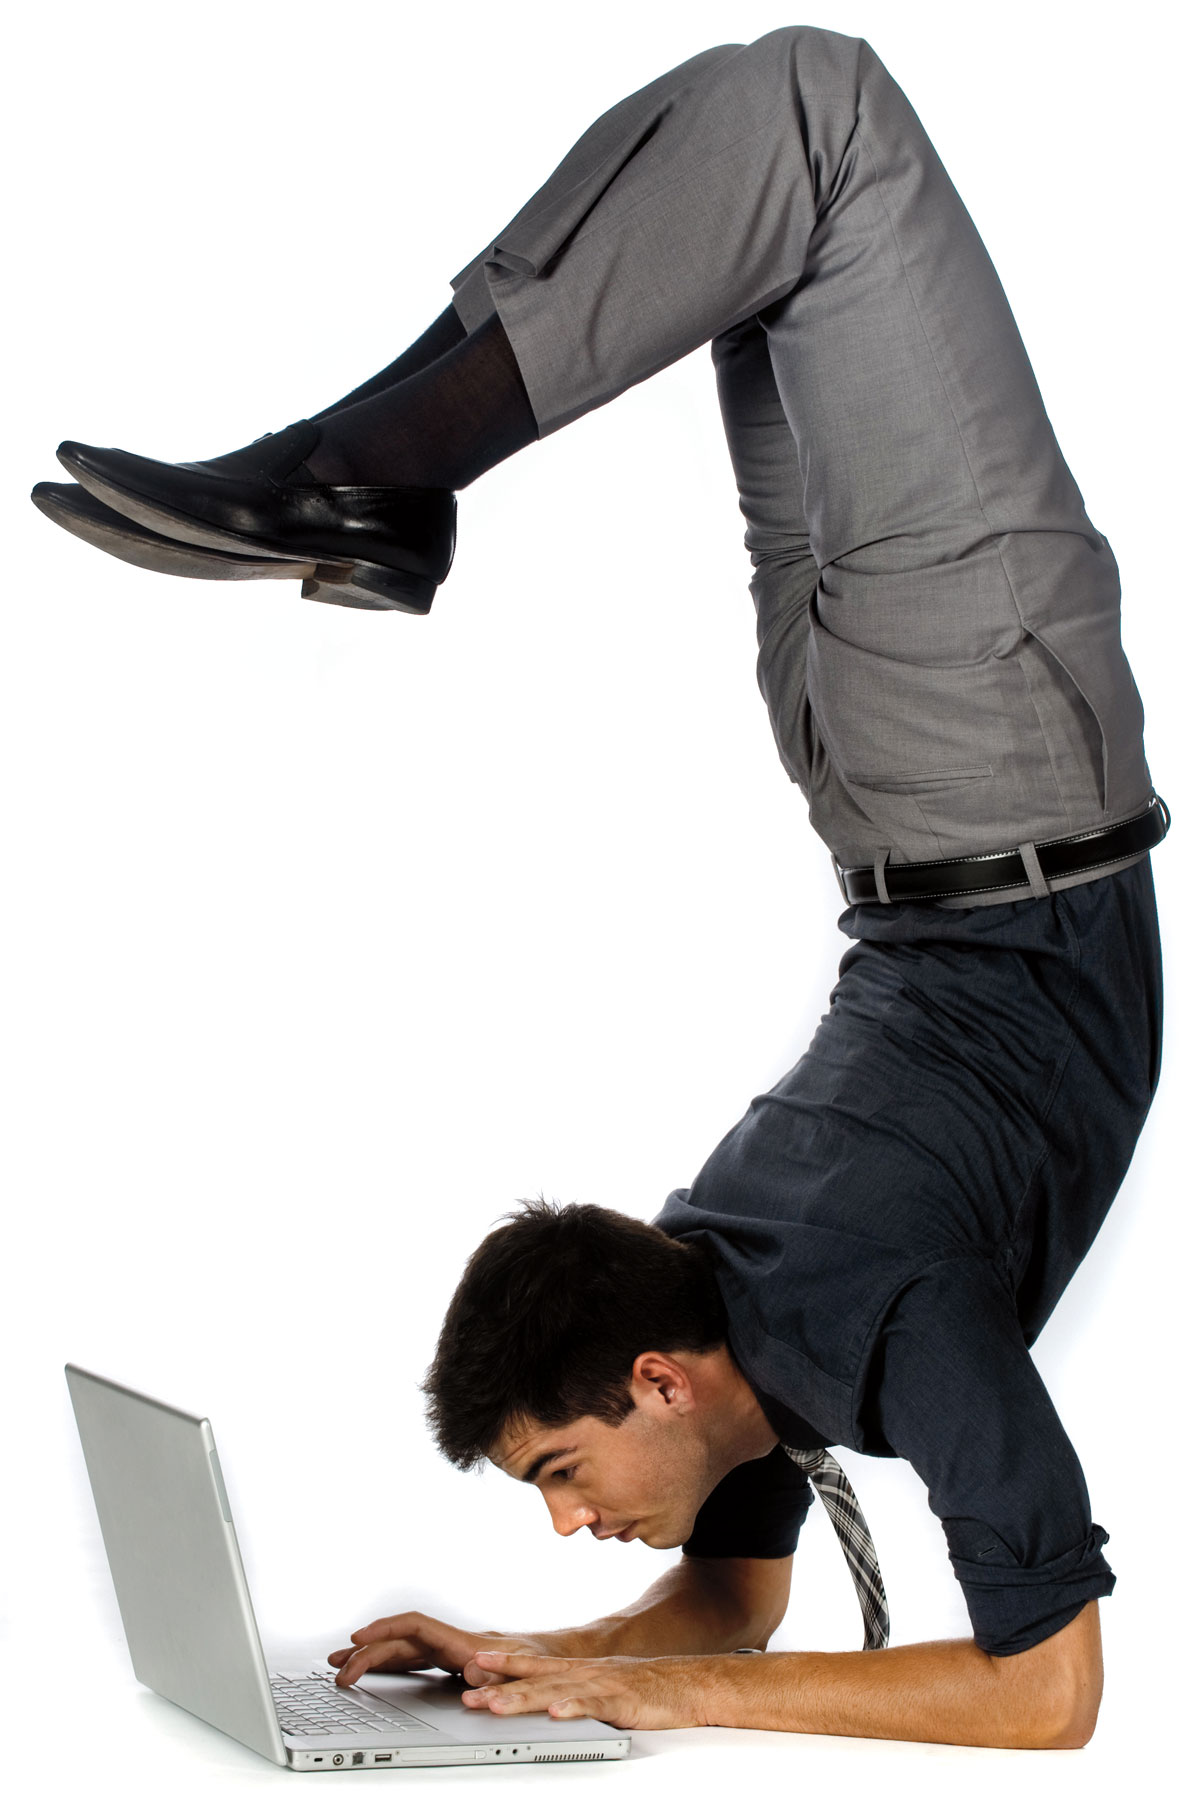 Man doing handstand while using computer